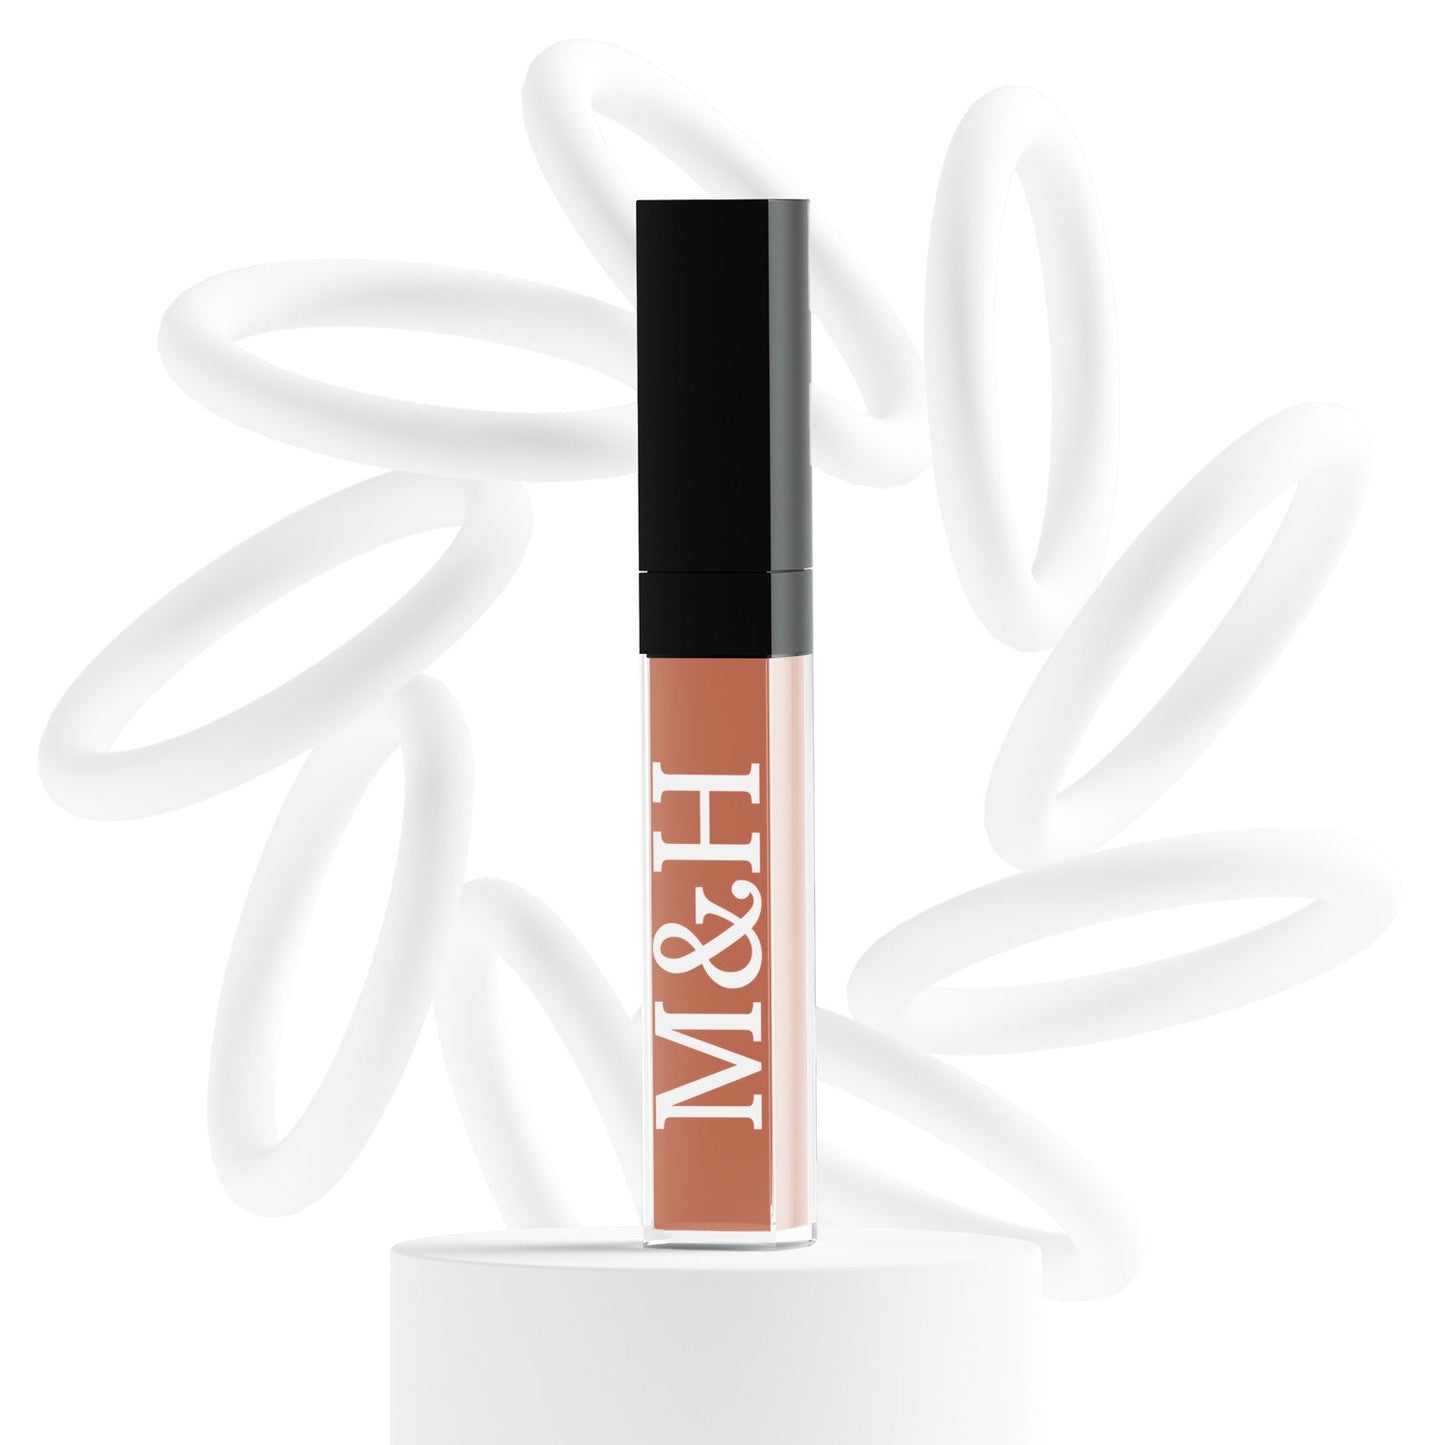 Vegan Concealers - M&H FashionVegan ConcealersconcealerM&H FashionM&H FashionConcealer-944Burnt Orange CorrectorVegan ConcealersM&H FashionconcealerM&H Fashion This multifunctional concealer is designed to cover under-eye circles, complexion alterations, and major imperfections like scars, hyperpigmentation, burns, and tatVegan Concealers